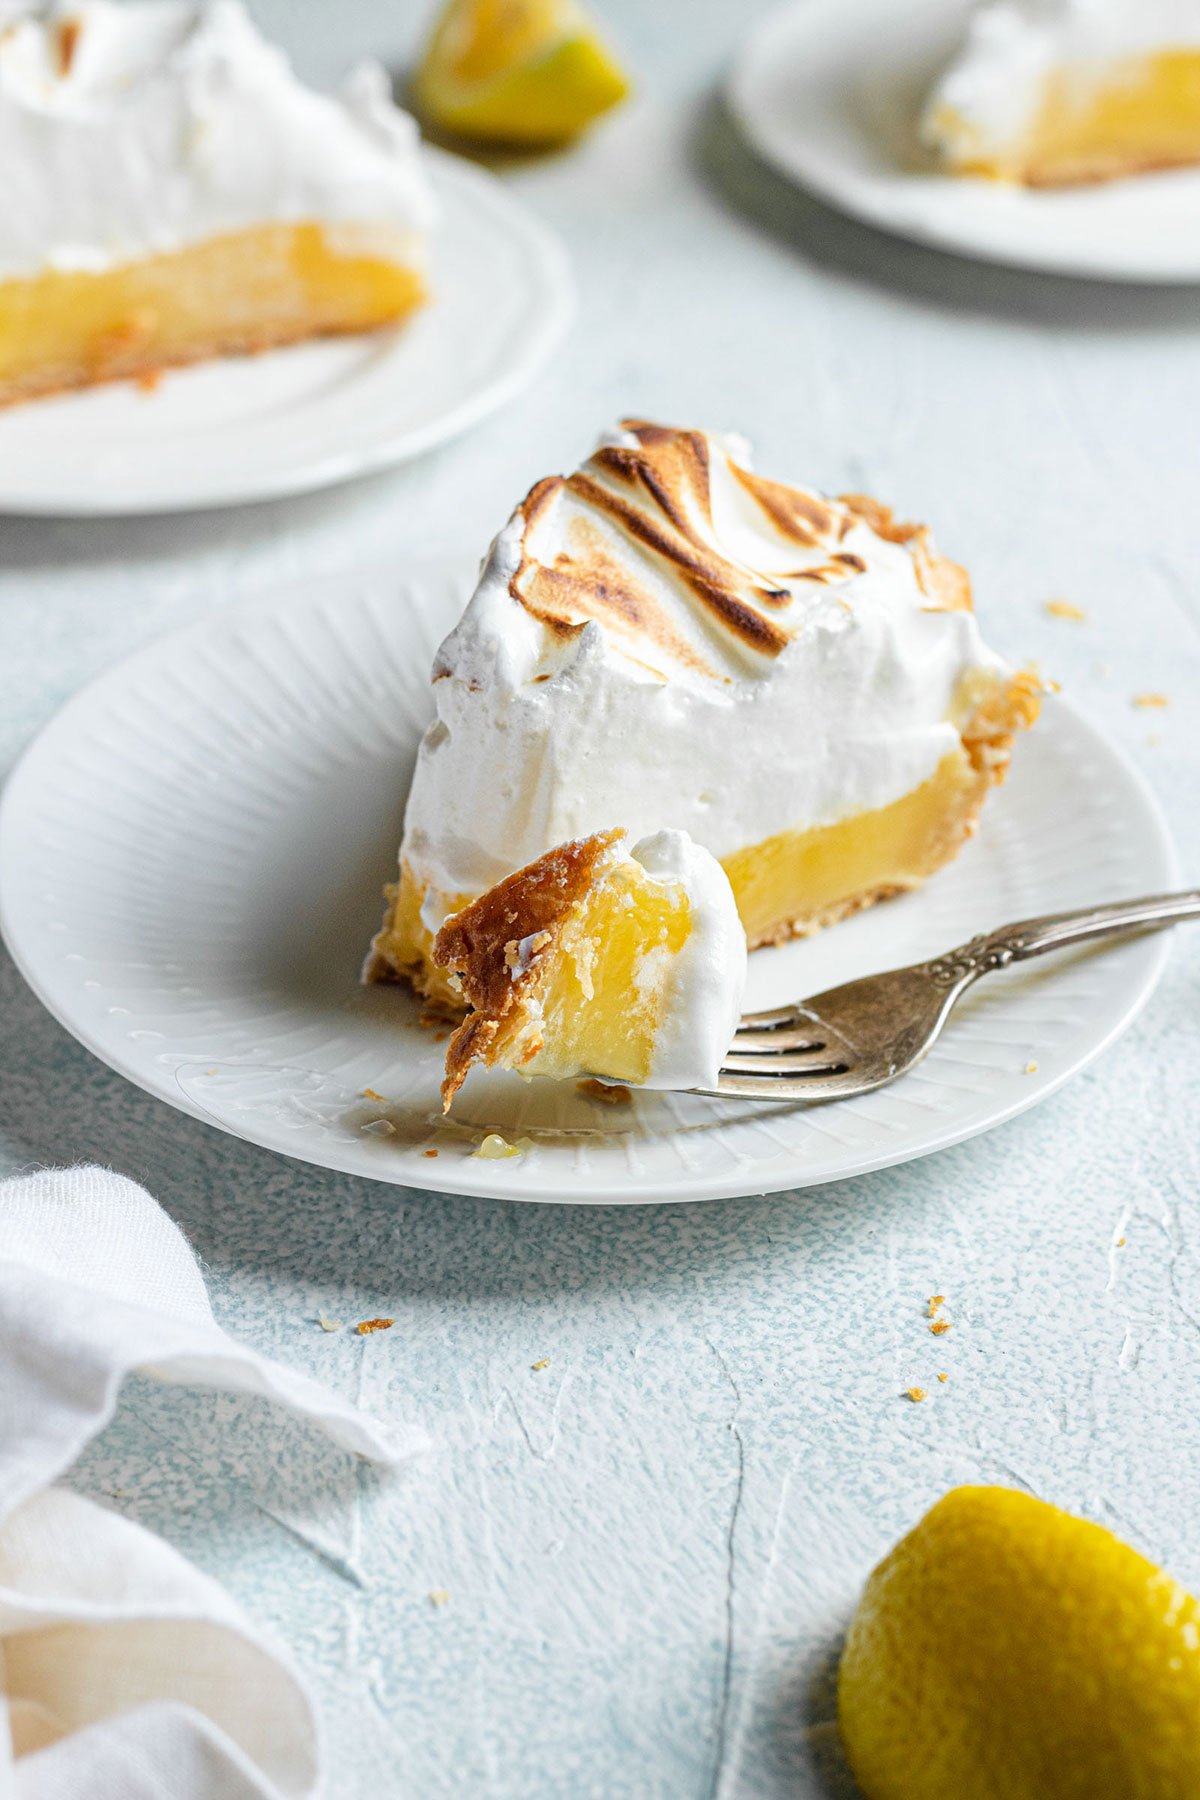 A slice of lemon meringue pie on a white plate with a fork.